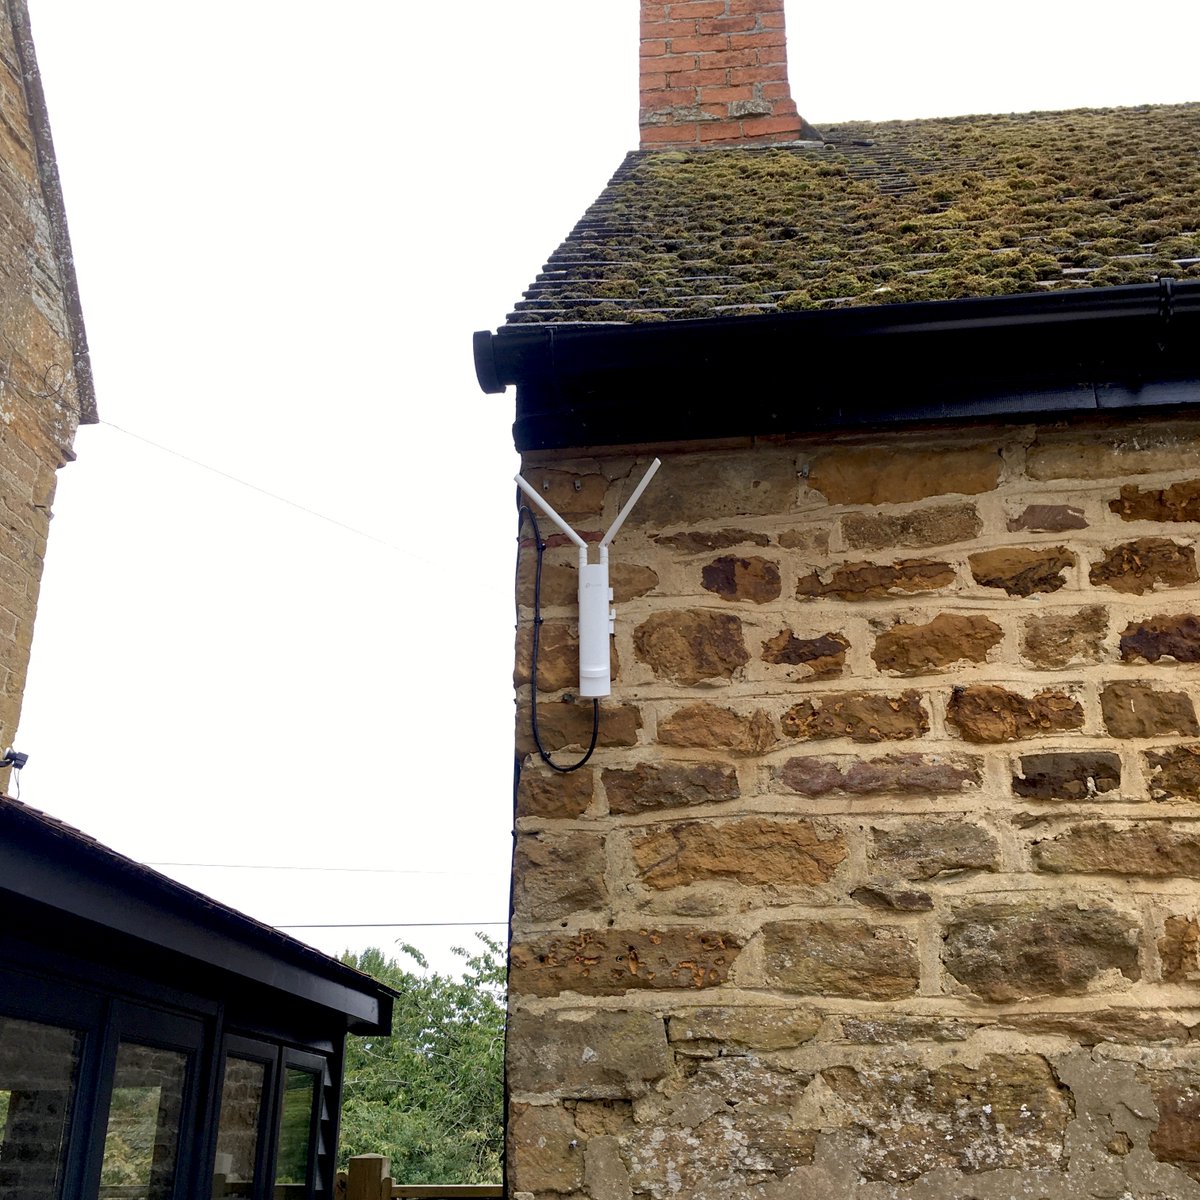 External TP-Link #Omada  AP installed providing WiFi connectivity to an outside office pod and garden area.
-Hardwired Cat6 ethernet backhaul with cabling discreetly routed under the soffit out of sight on the front aspect. #gardenoffice, #mancave, #summerhouse #daventryAerials